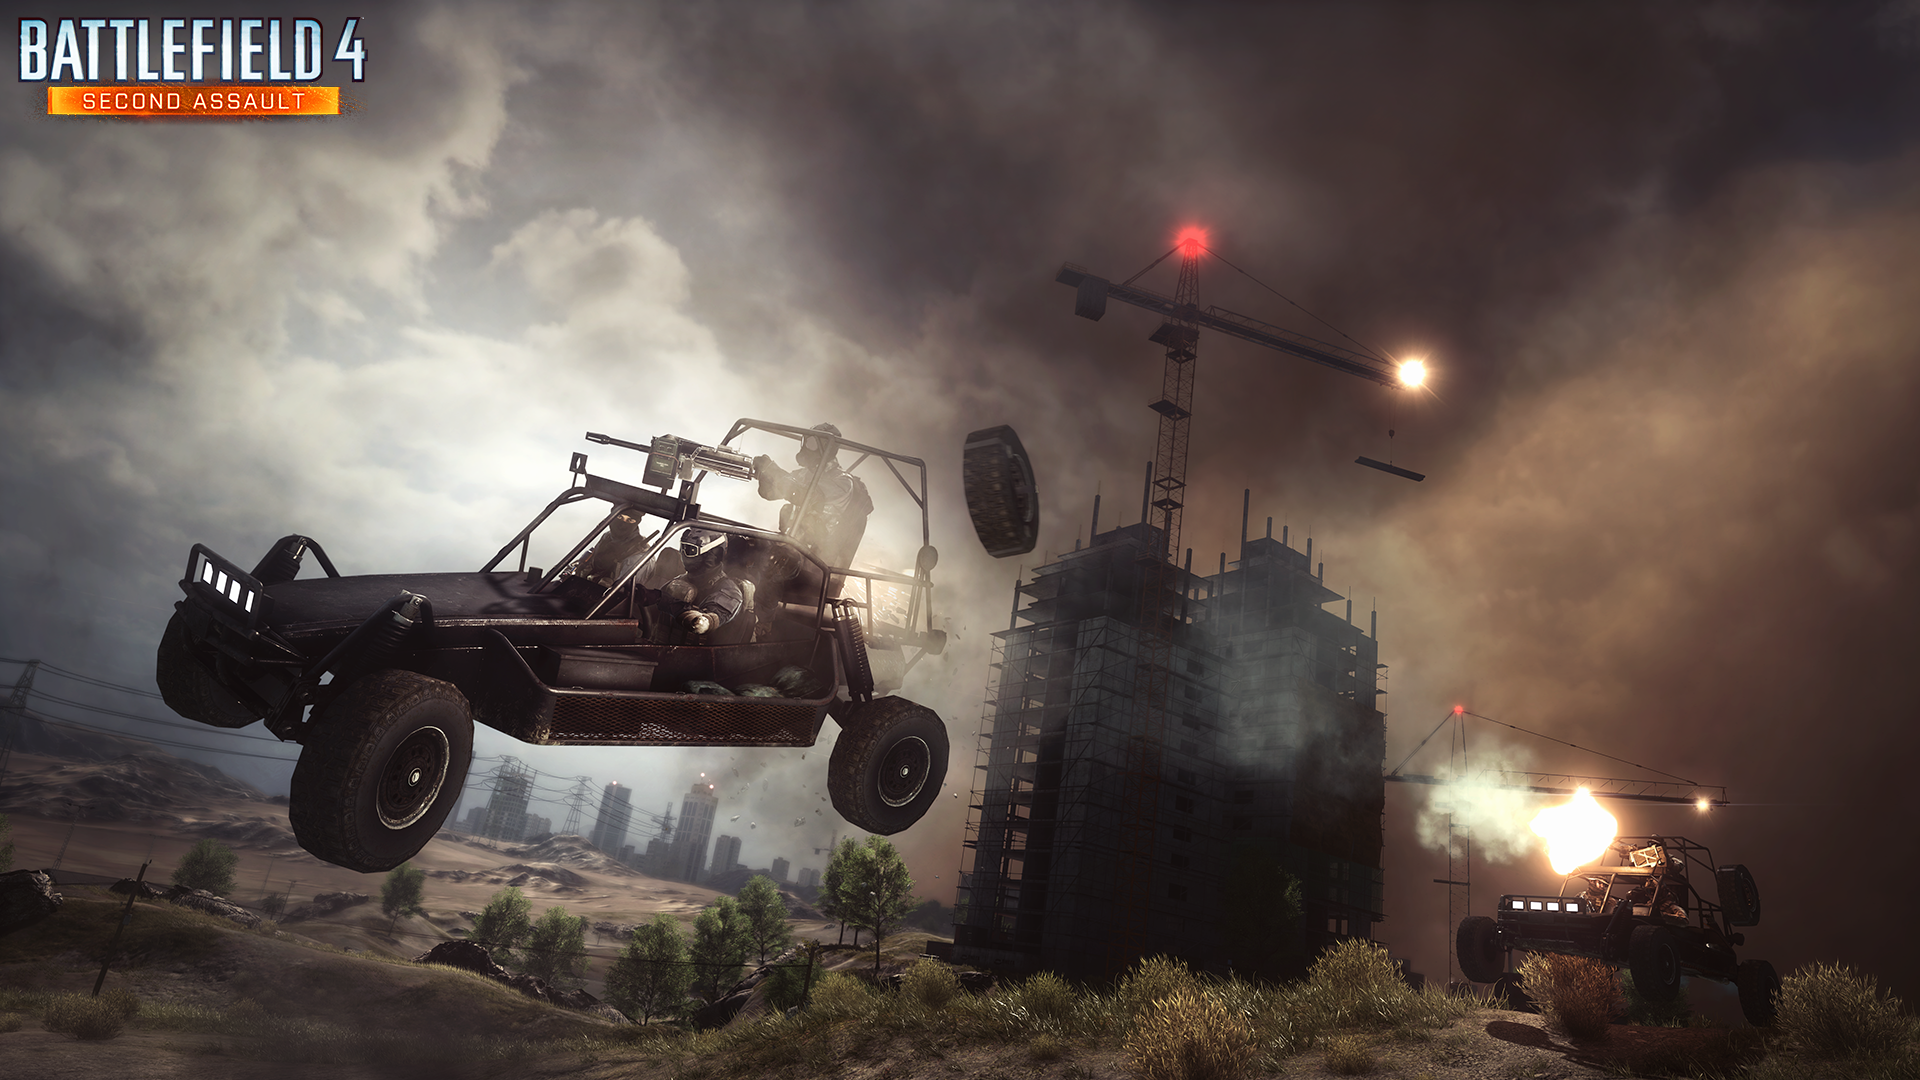 Battlefield 4: Final Stand' DLC Releases Tomorrow for Premium Members